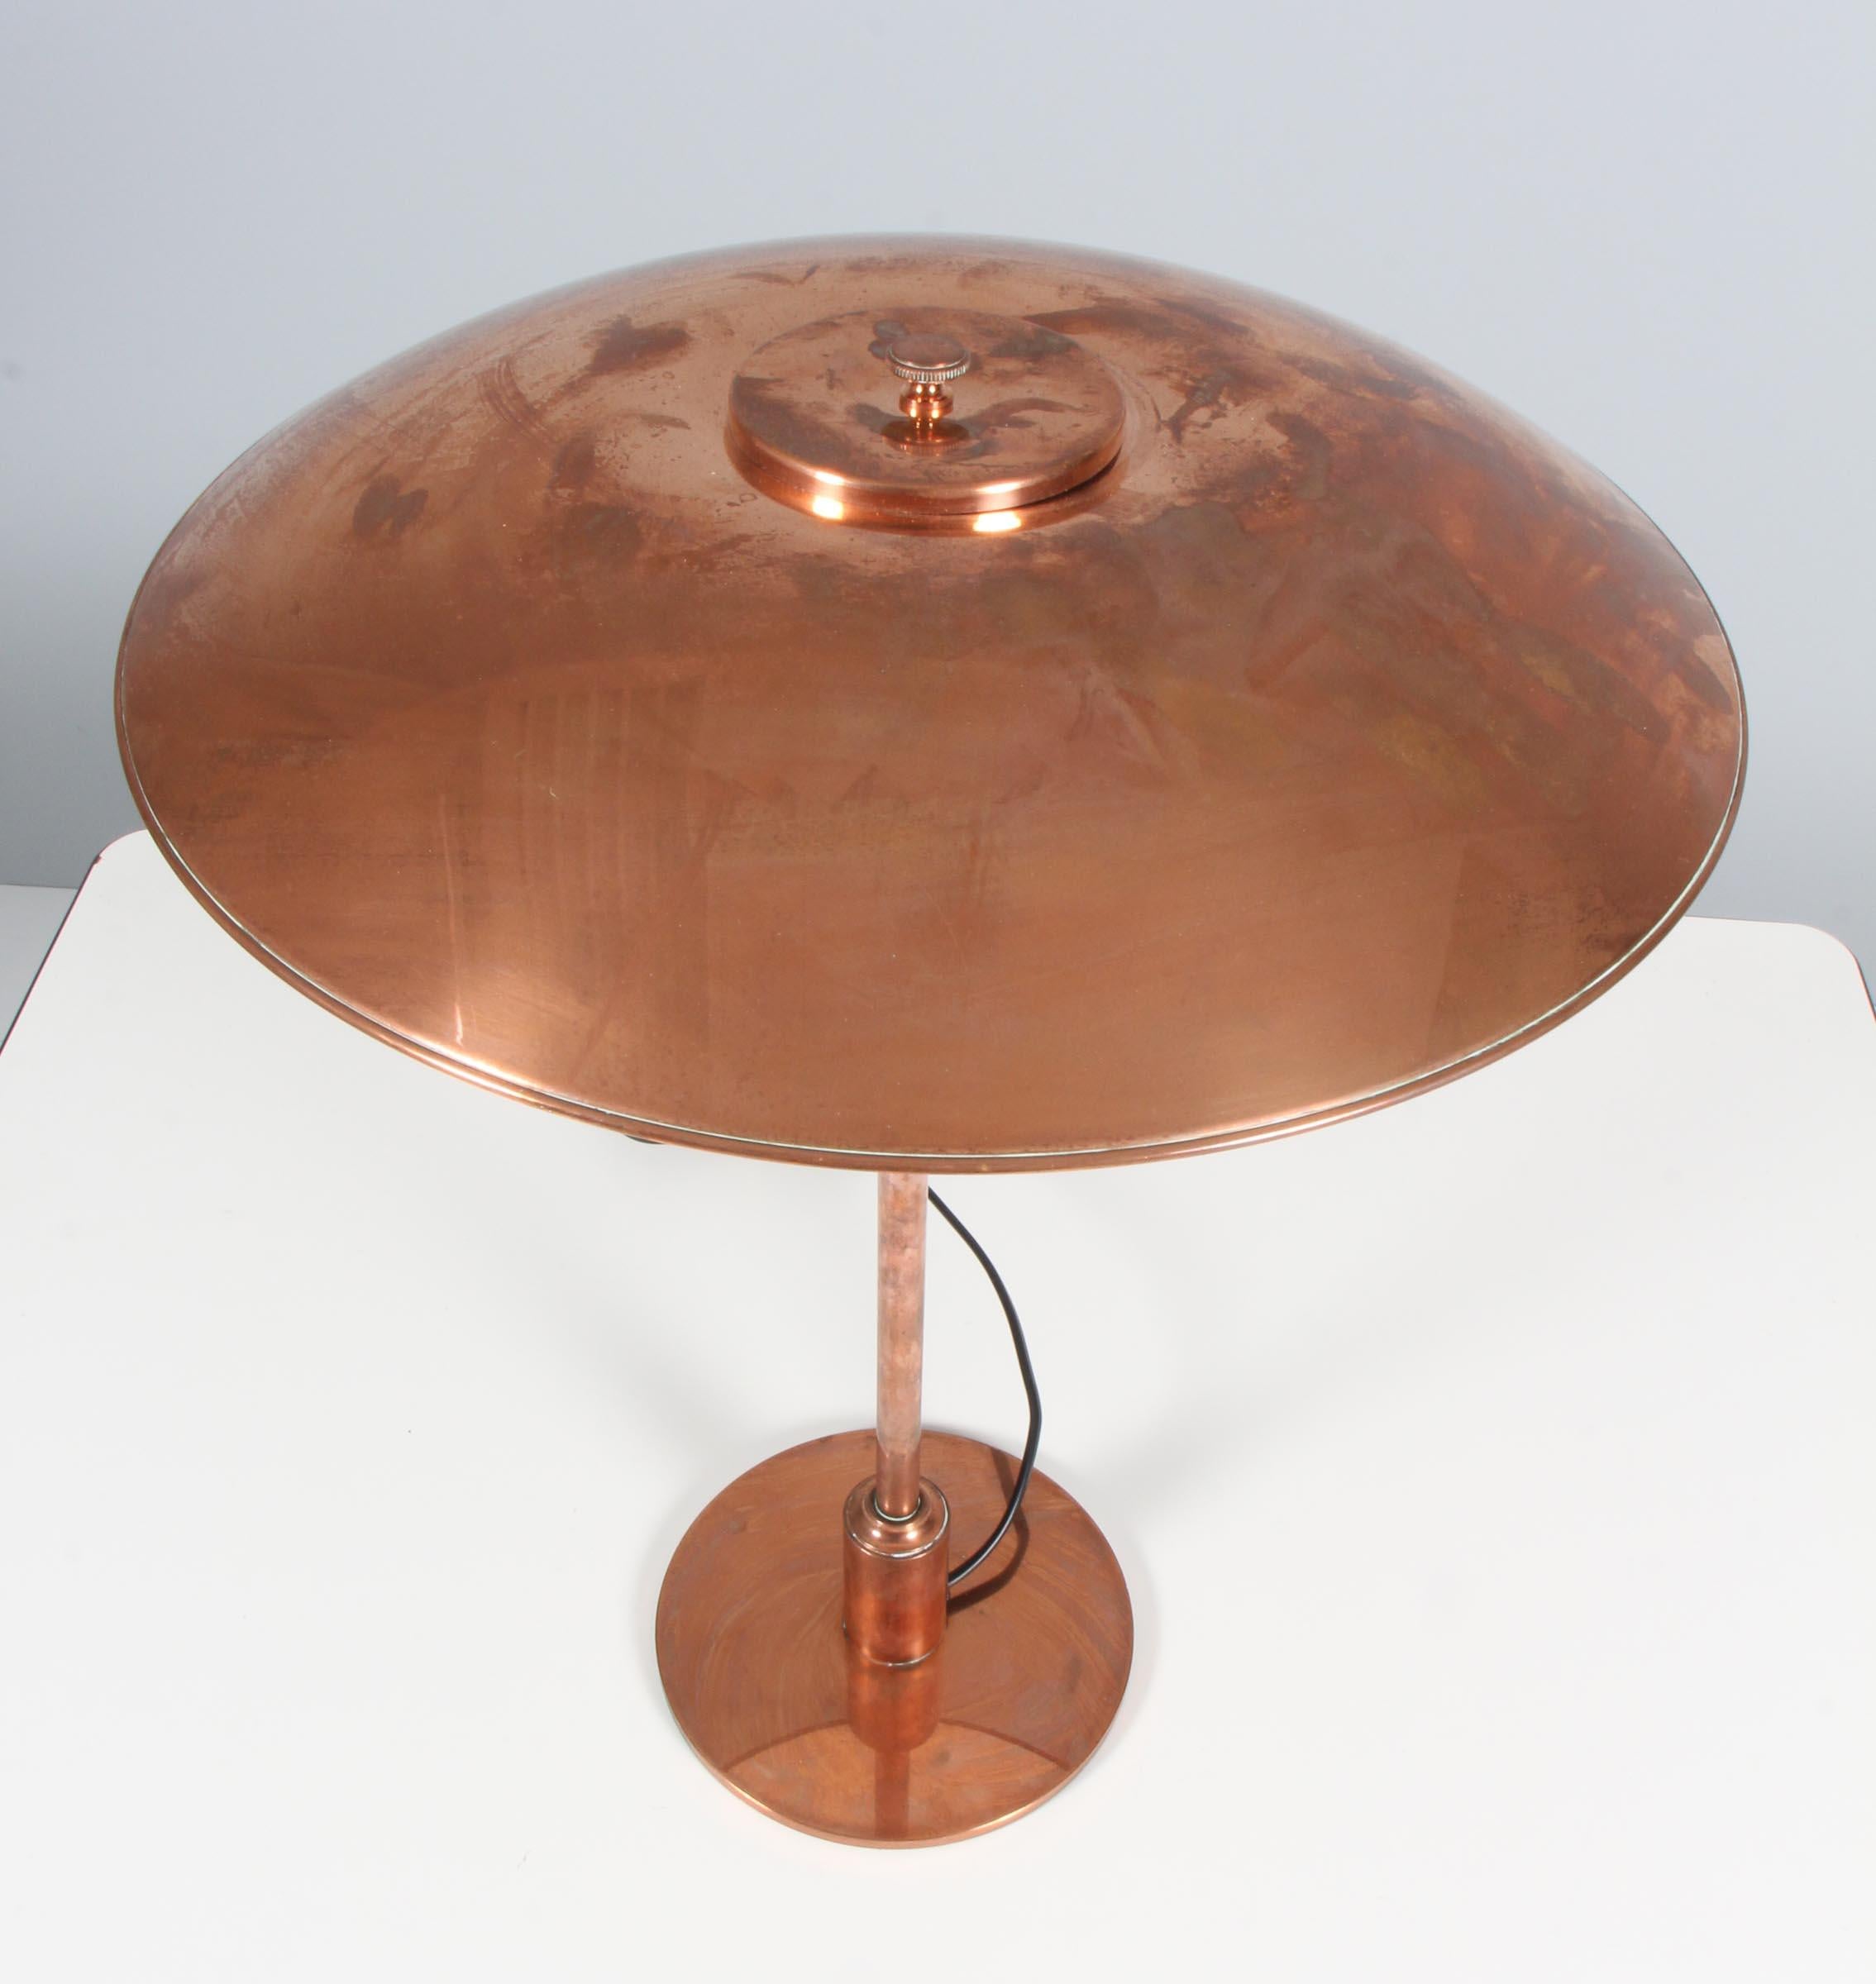 PH 3, 5/2, 5 Copper Table Lamp by Poul Henningsen 1